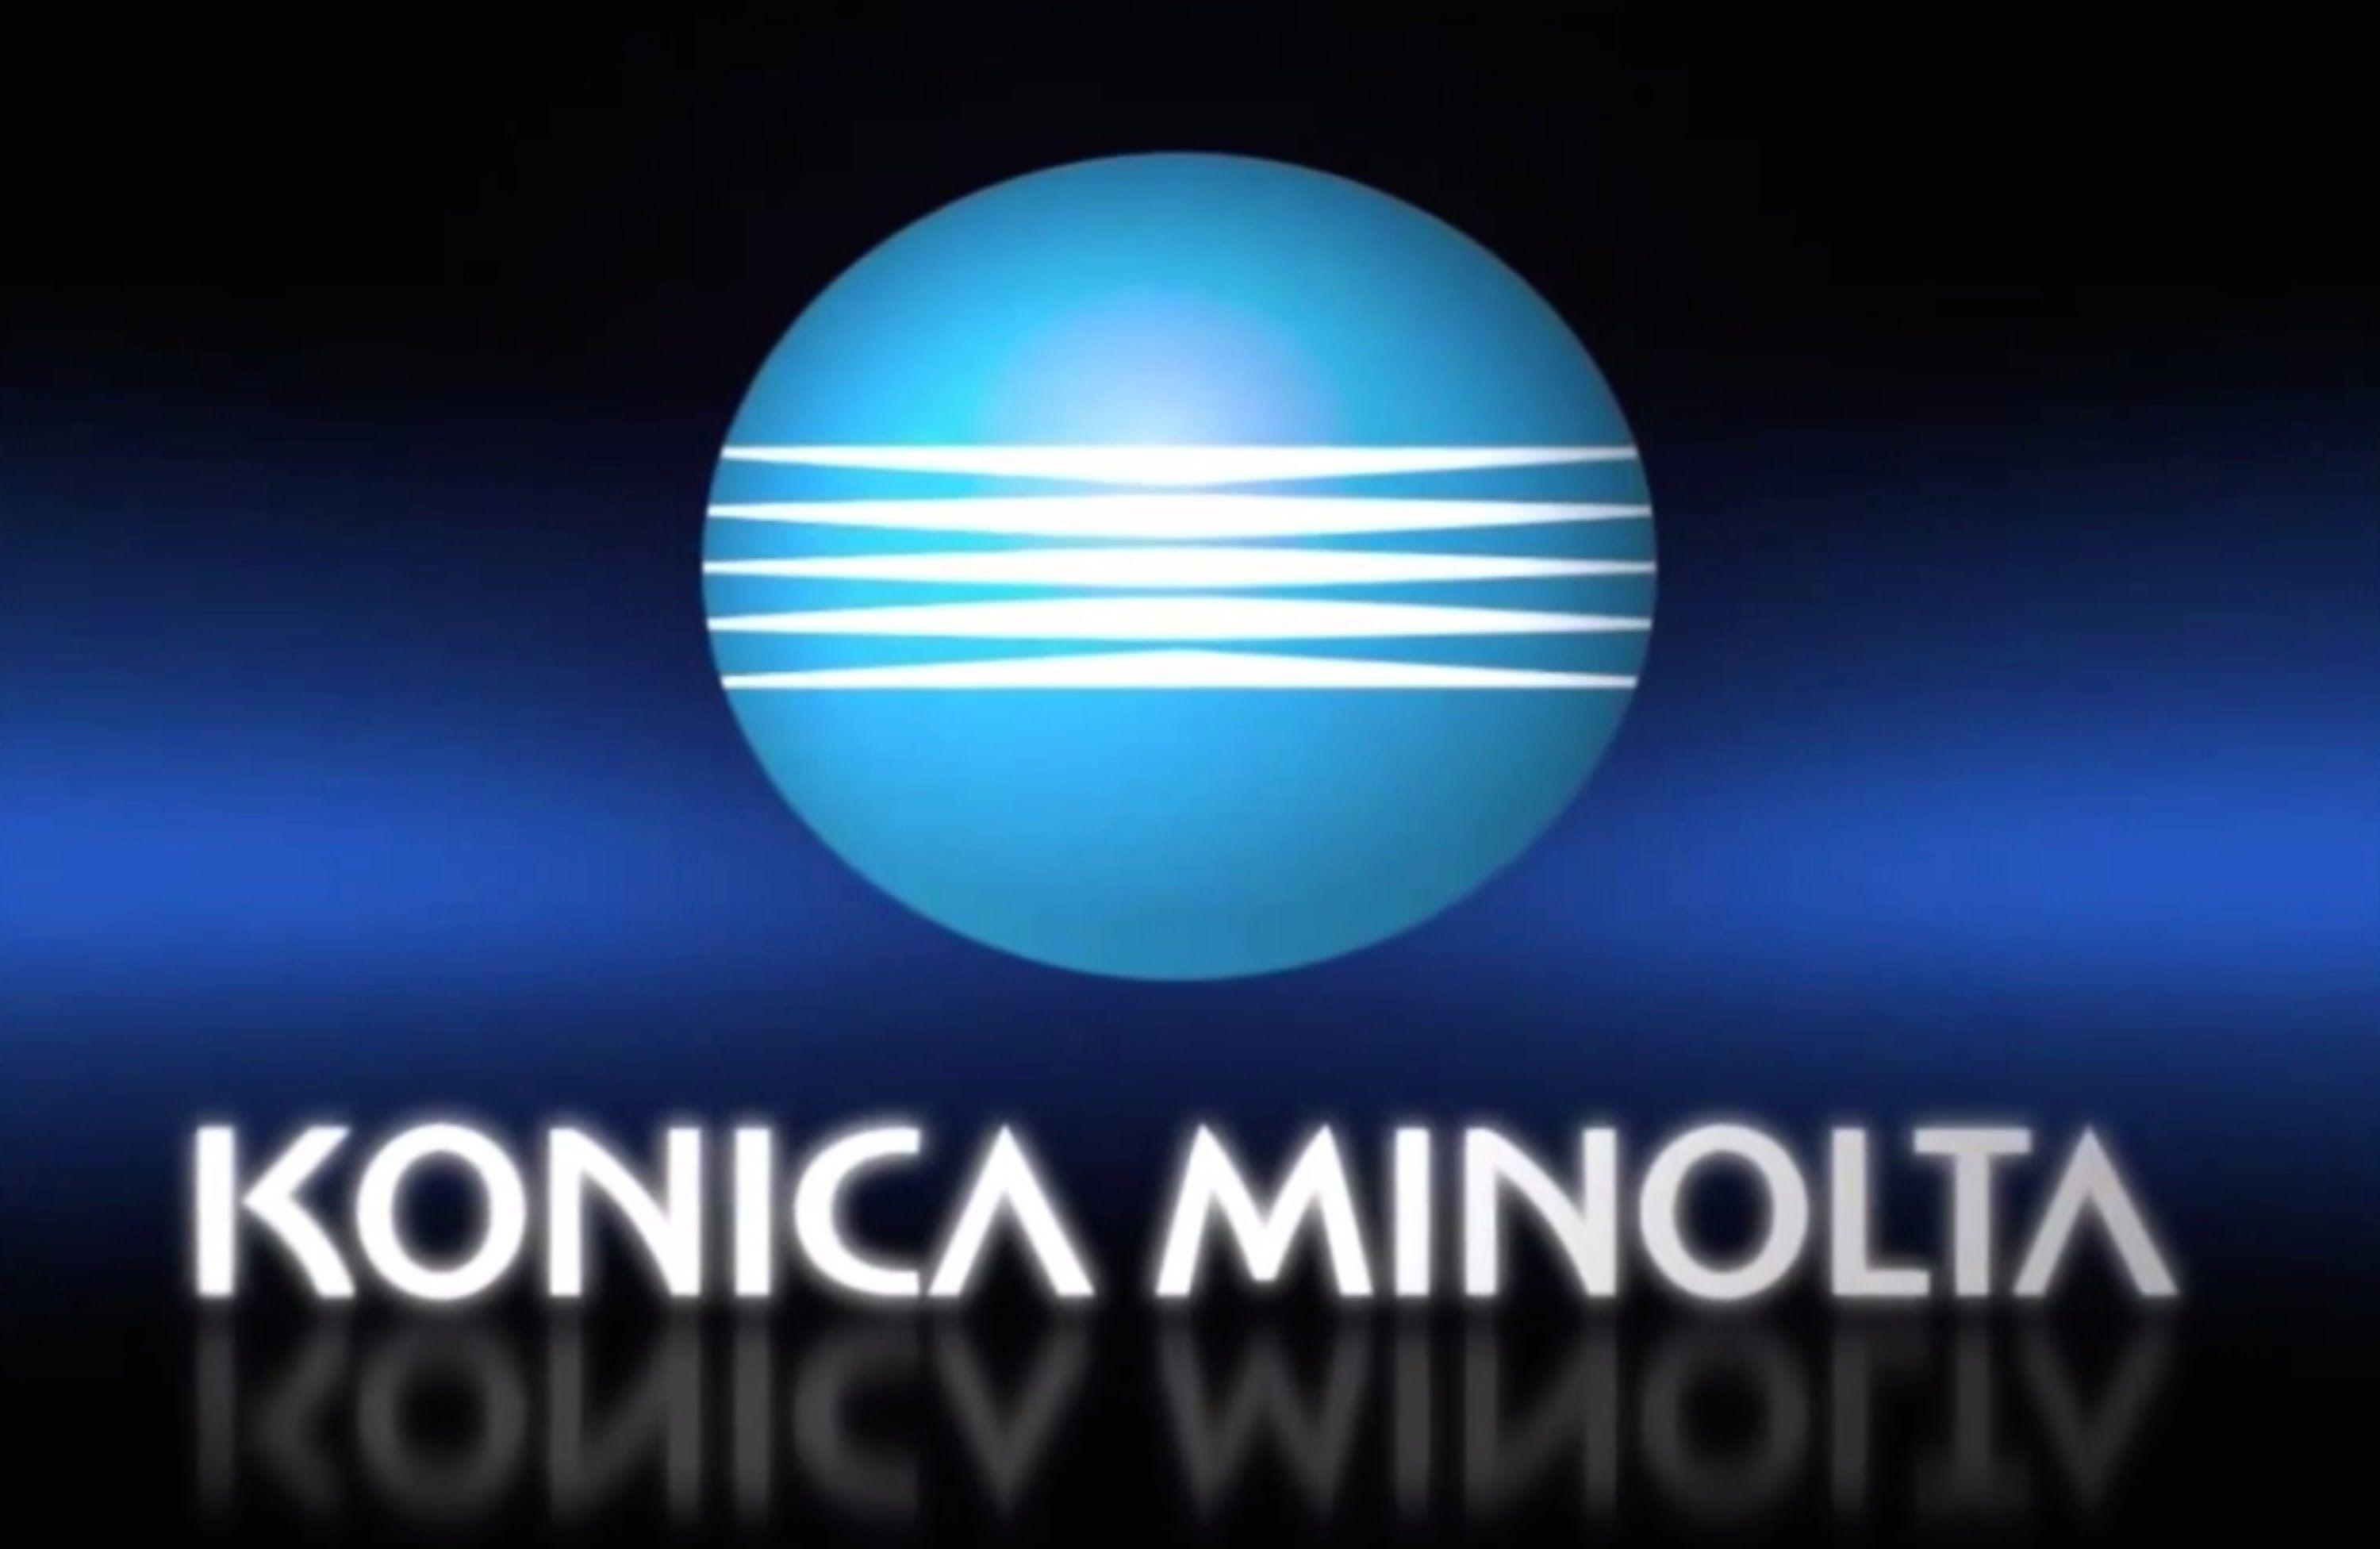 Konica Minolta Logo - Konica Minolta Logo】. Konica Minolta Logo PNG Vector Free Download